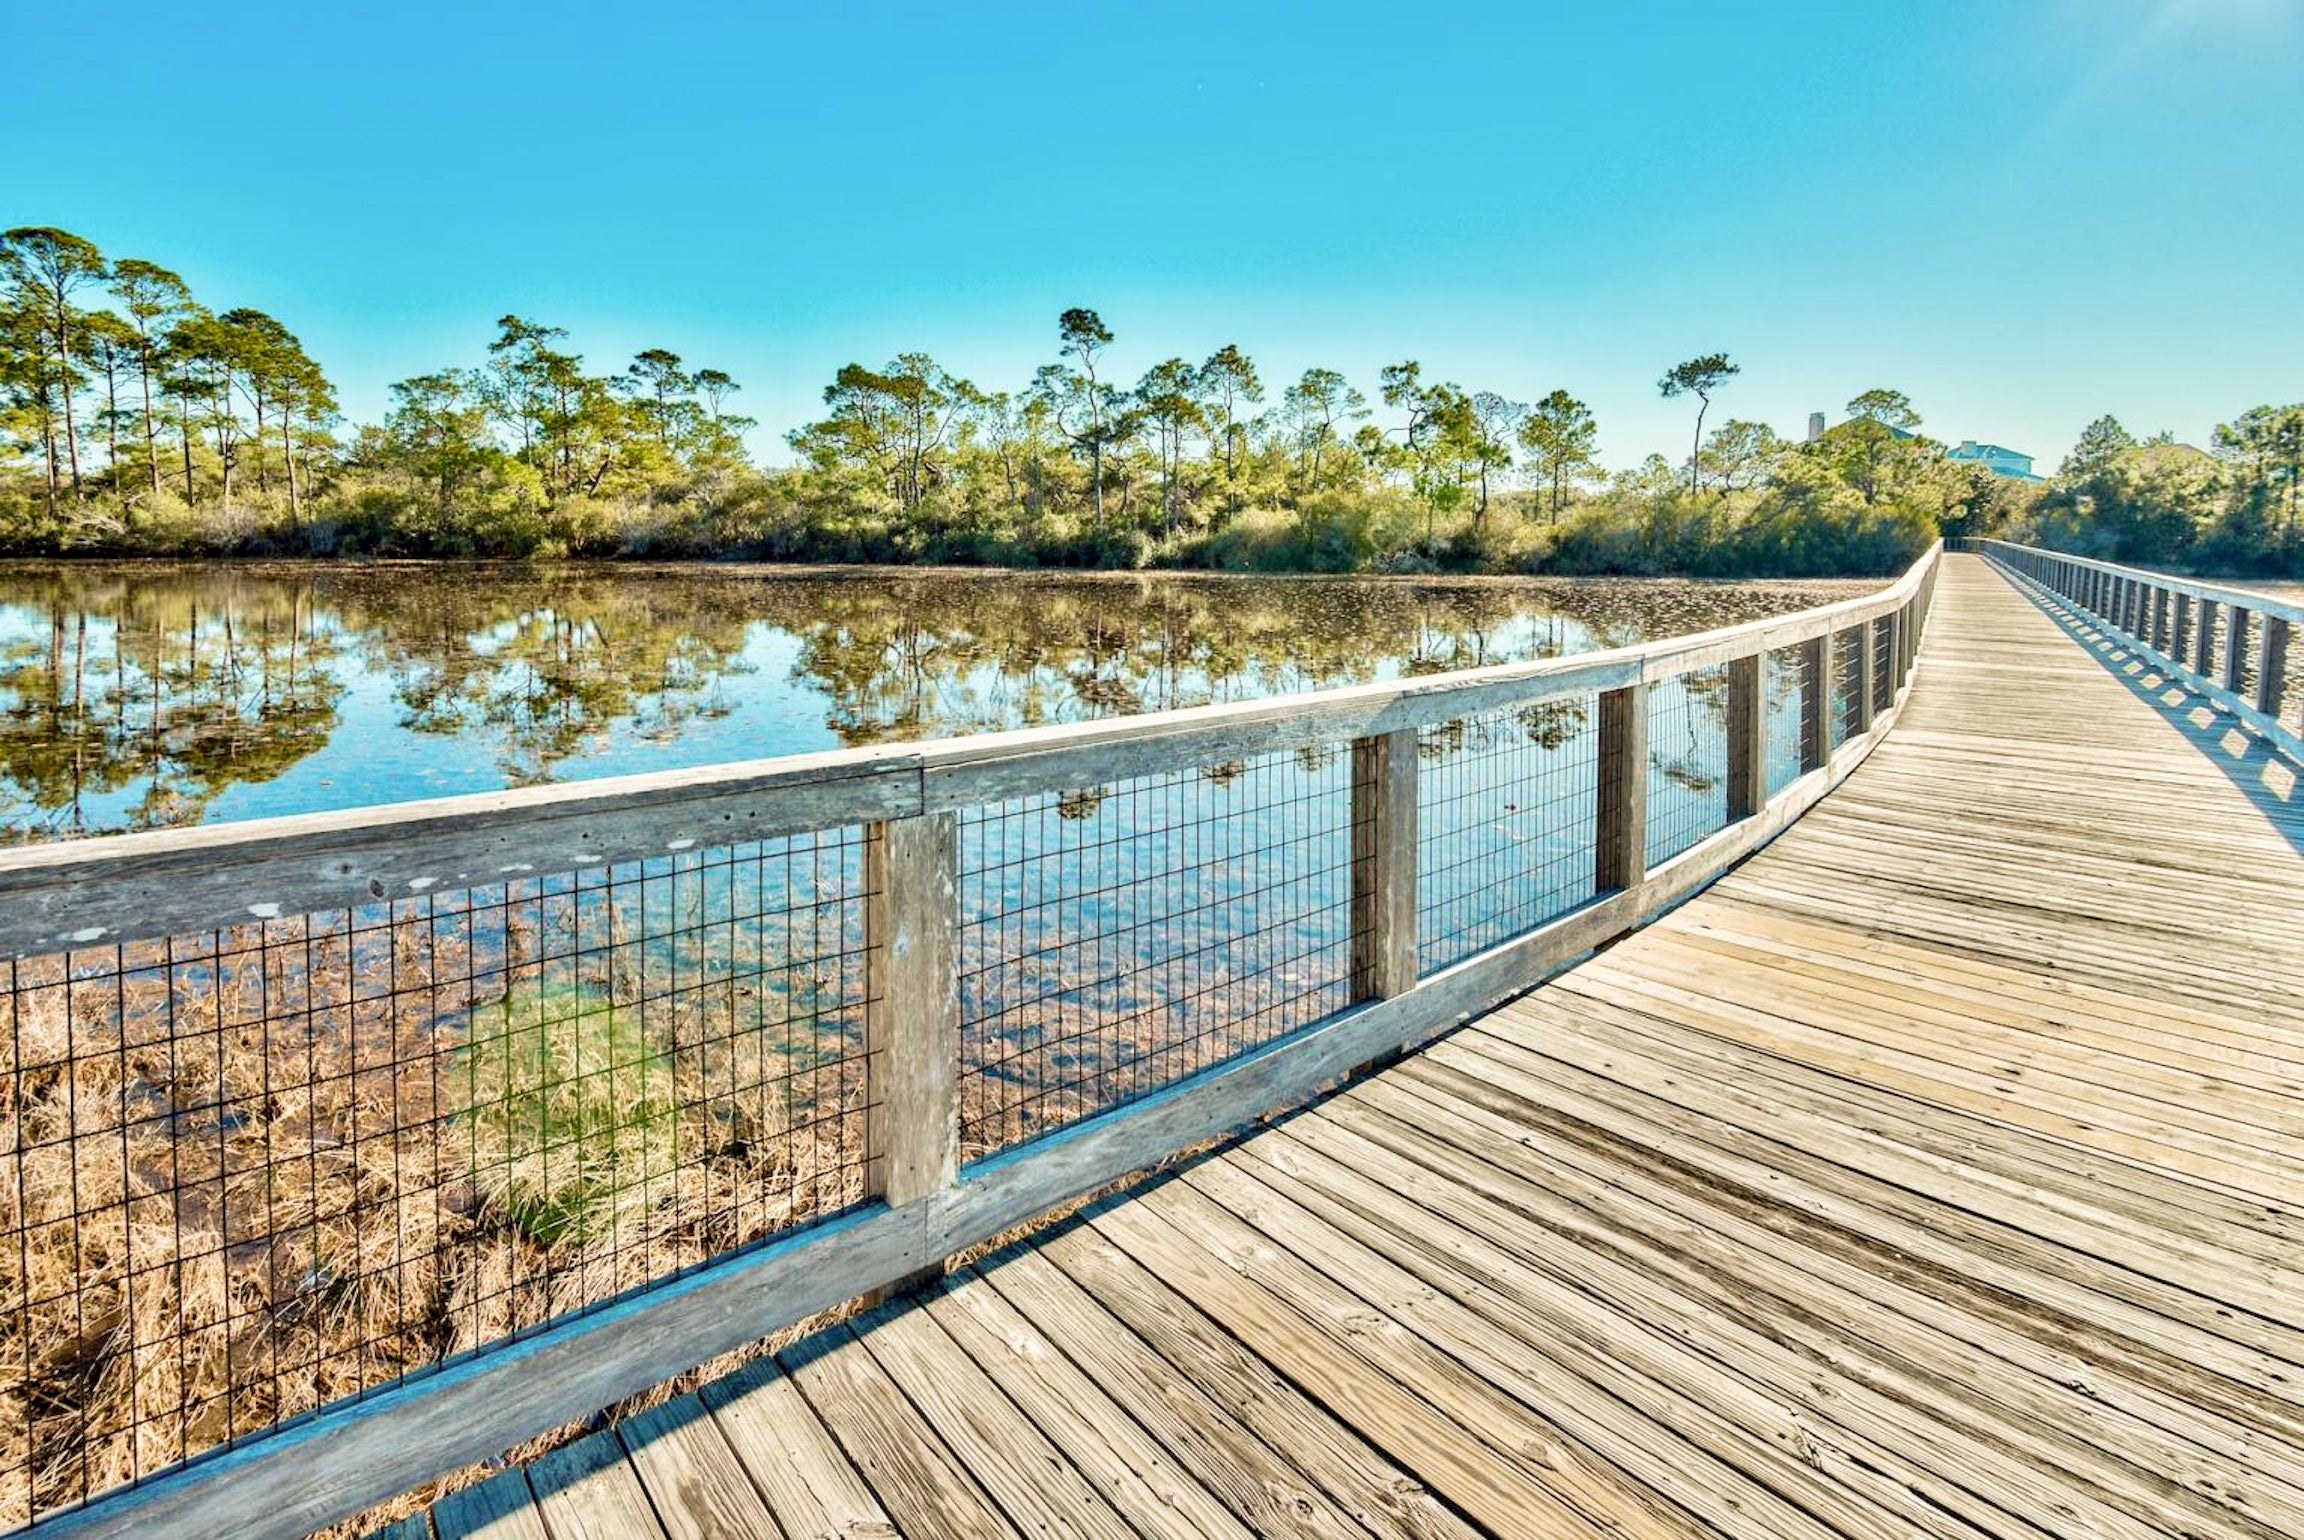 Enjoy the Winding Boardwalk and Nature Trails